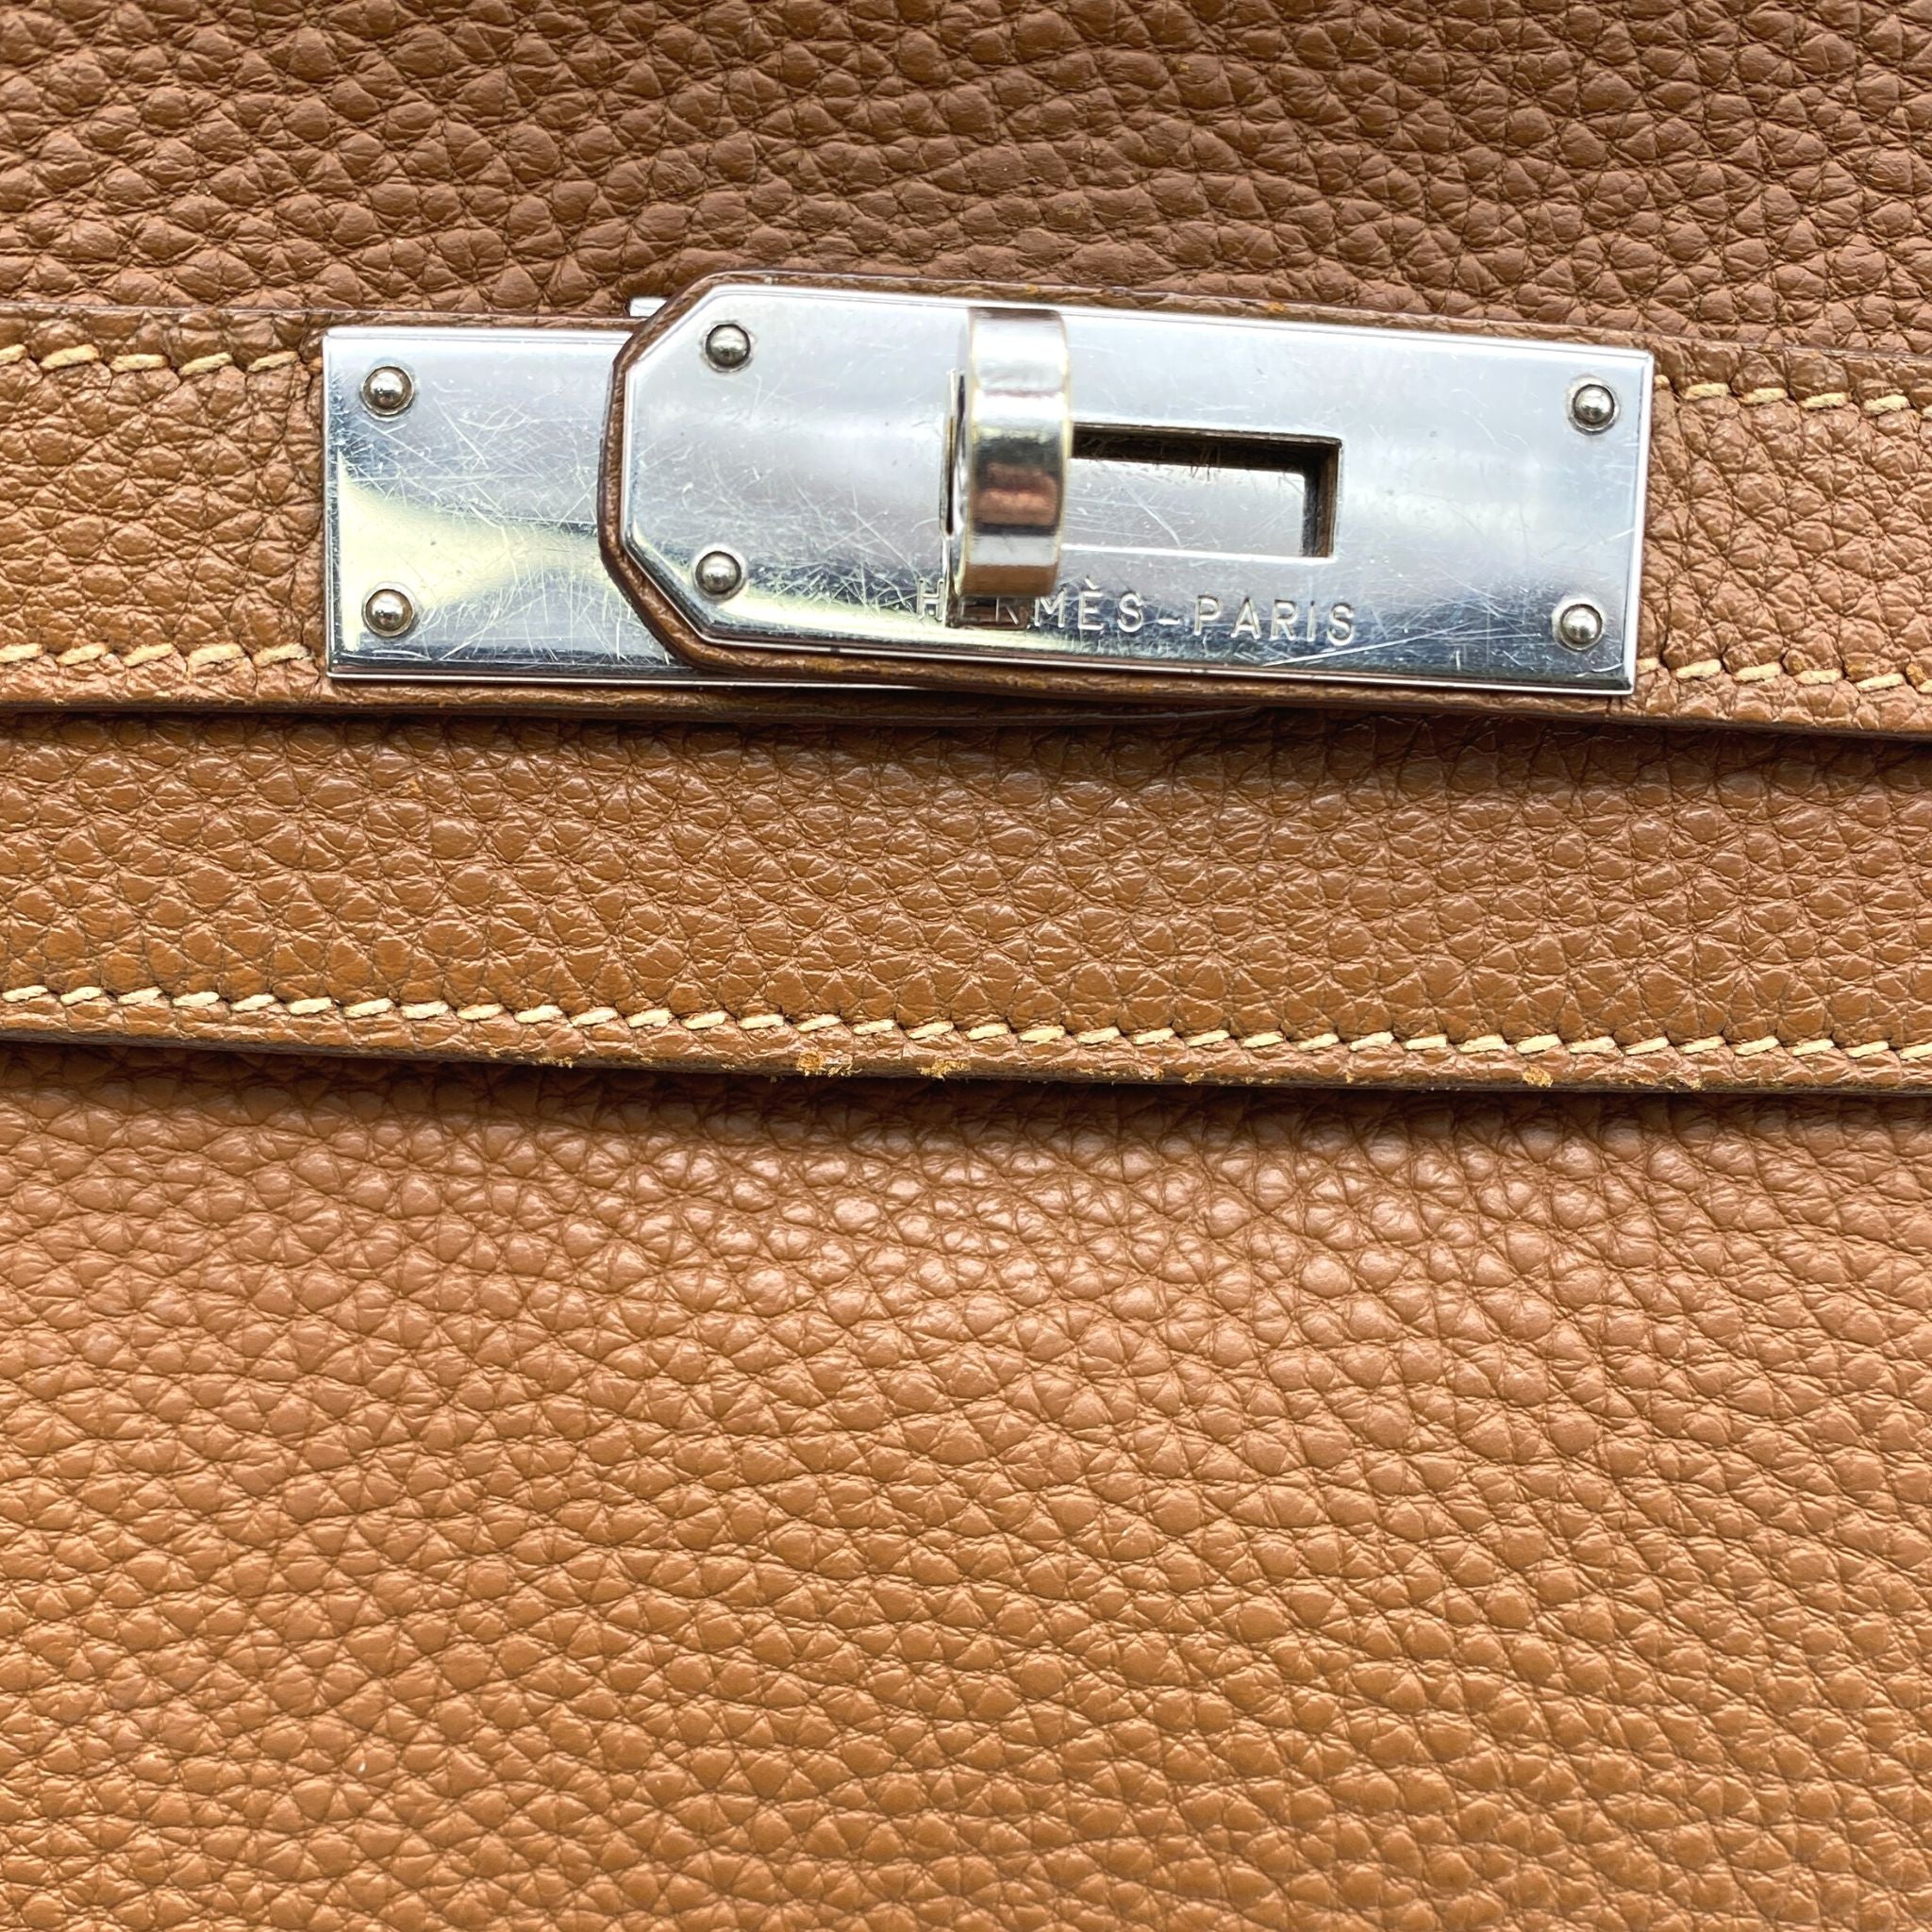 Hermes, Bags, Hermes Kelly 32 Gold With Palladium Hardware